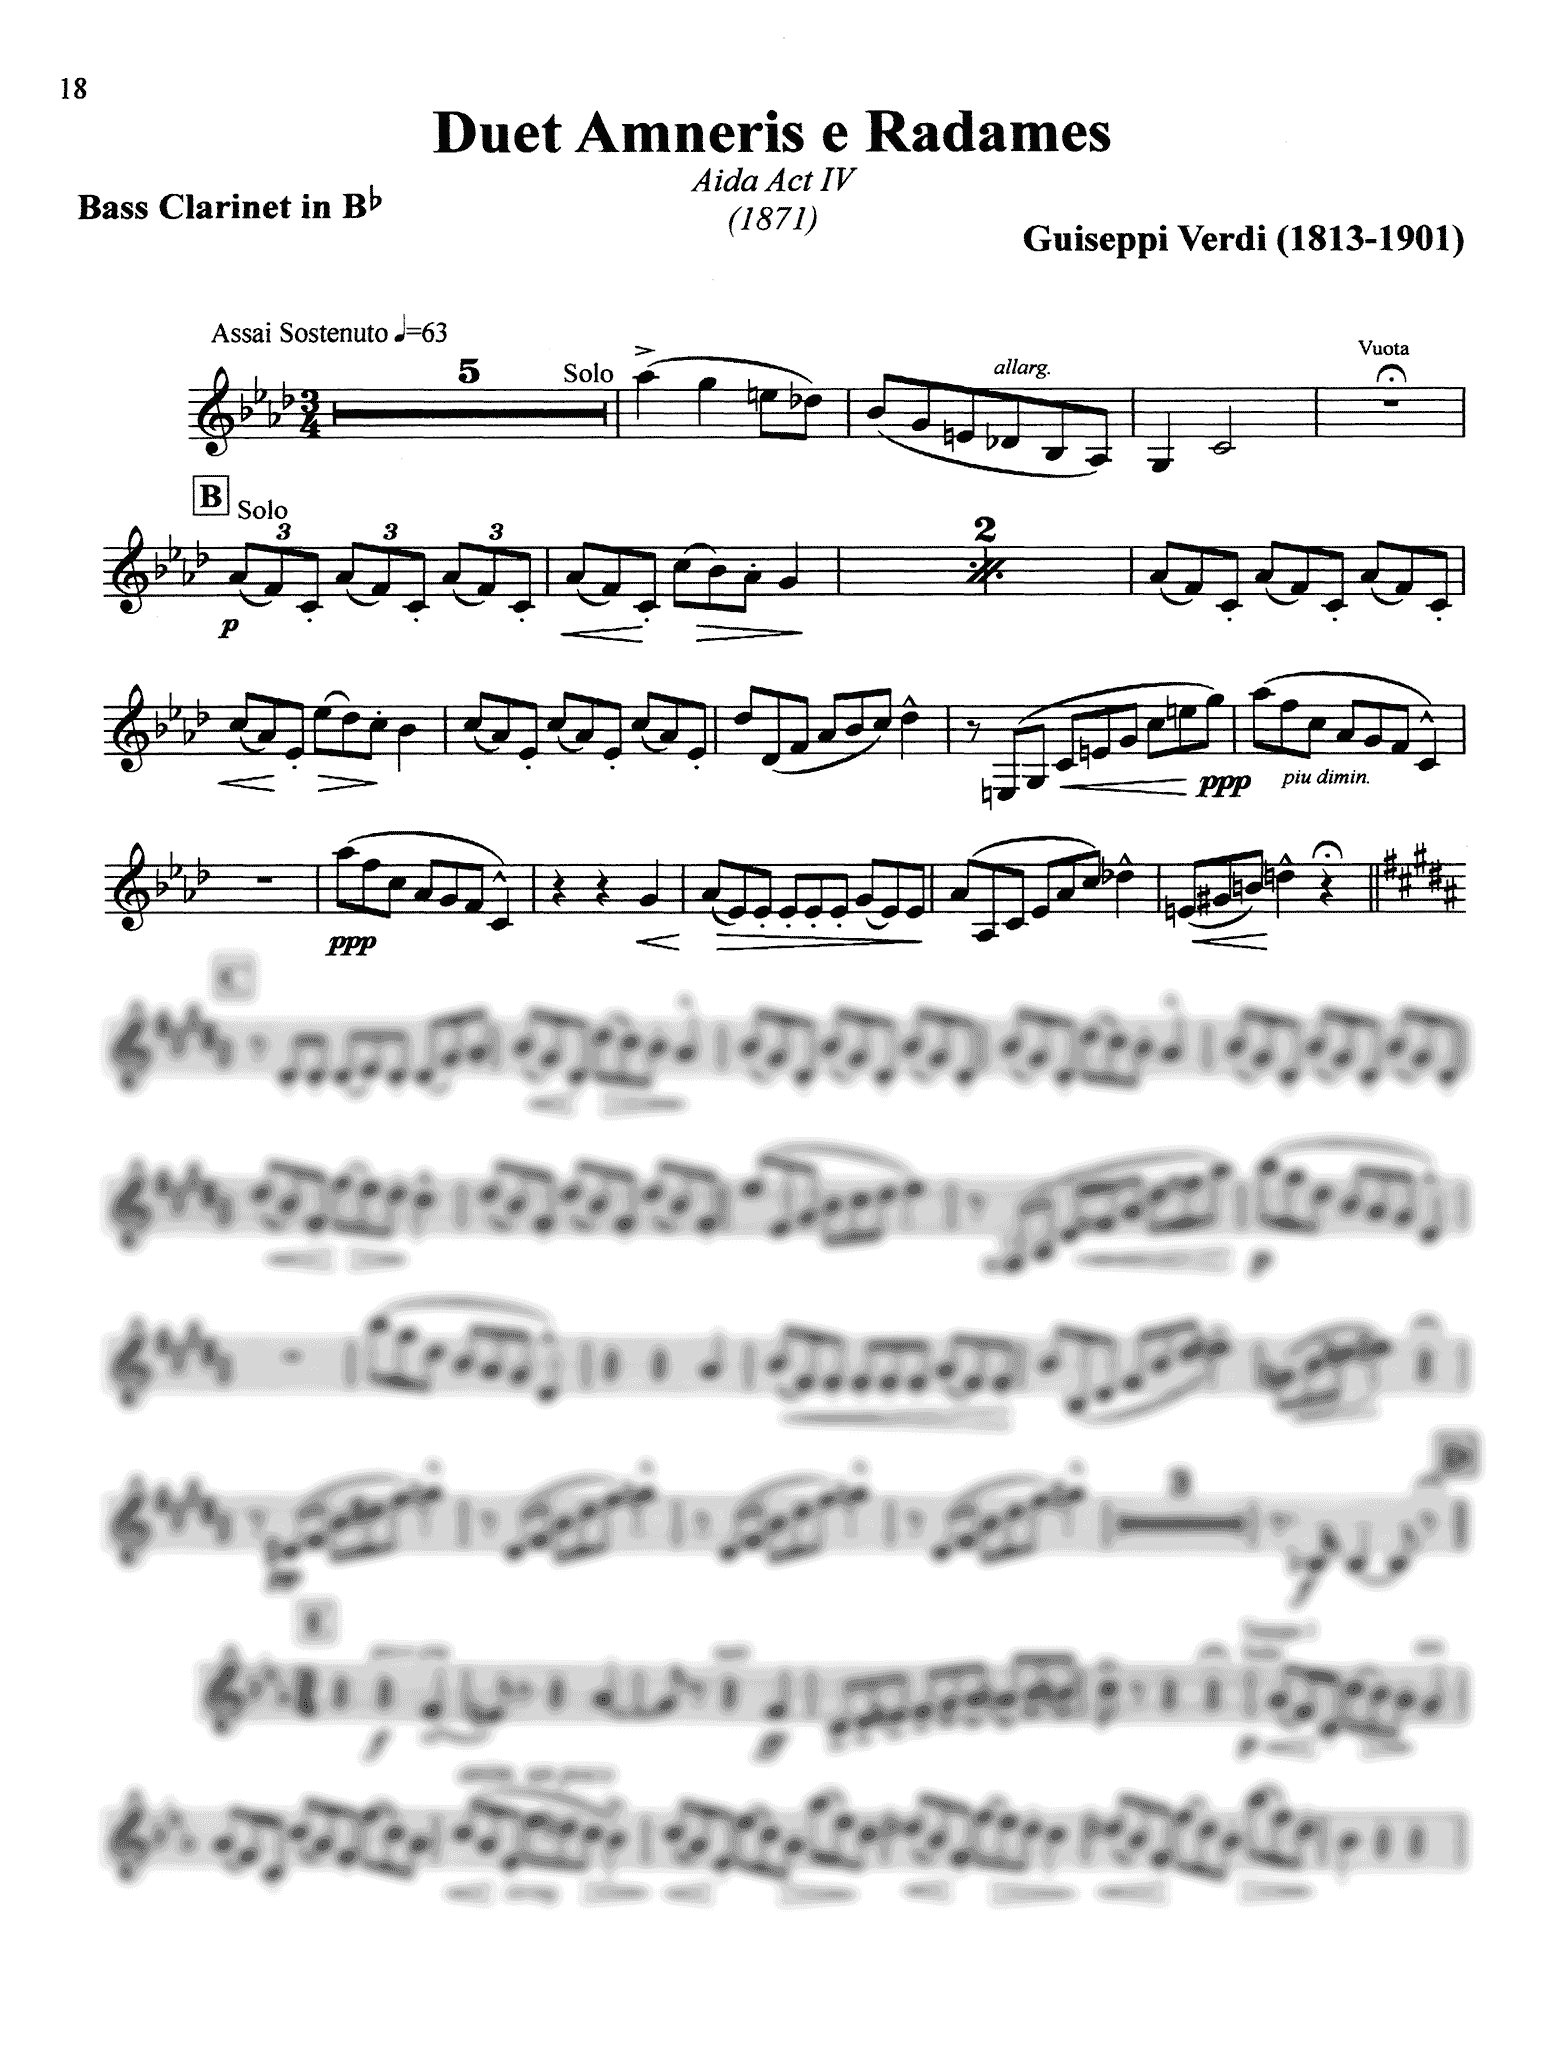 Symphonic Repertoire for the Bass Clarinet, Volume 1 Page 18